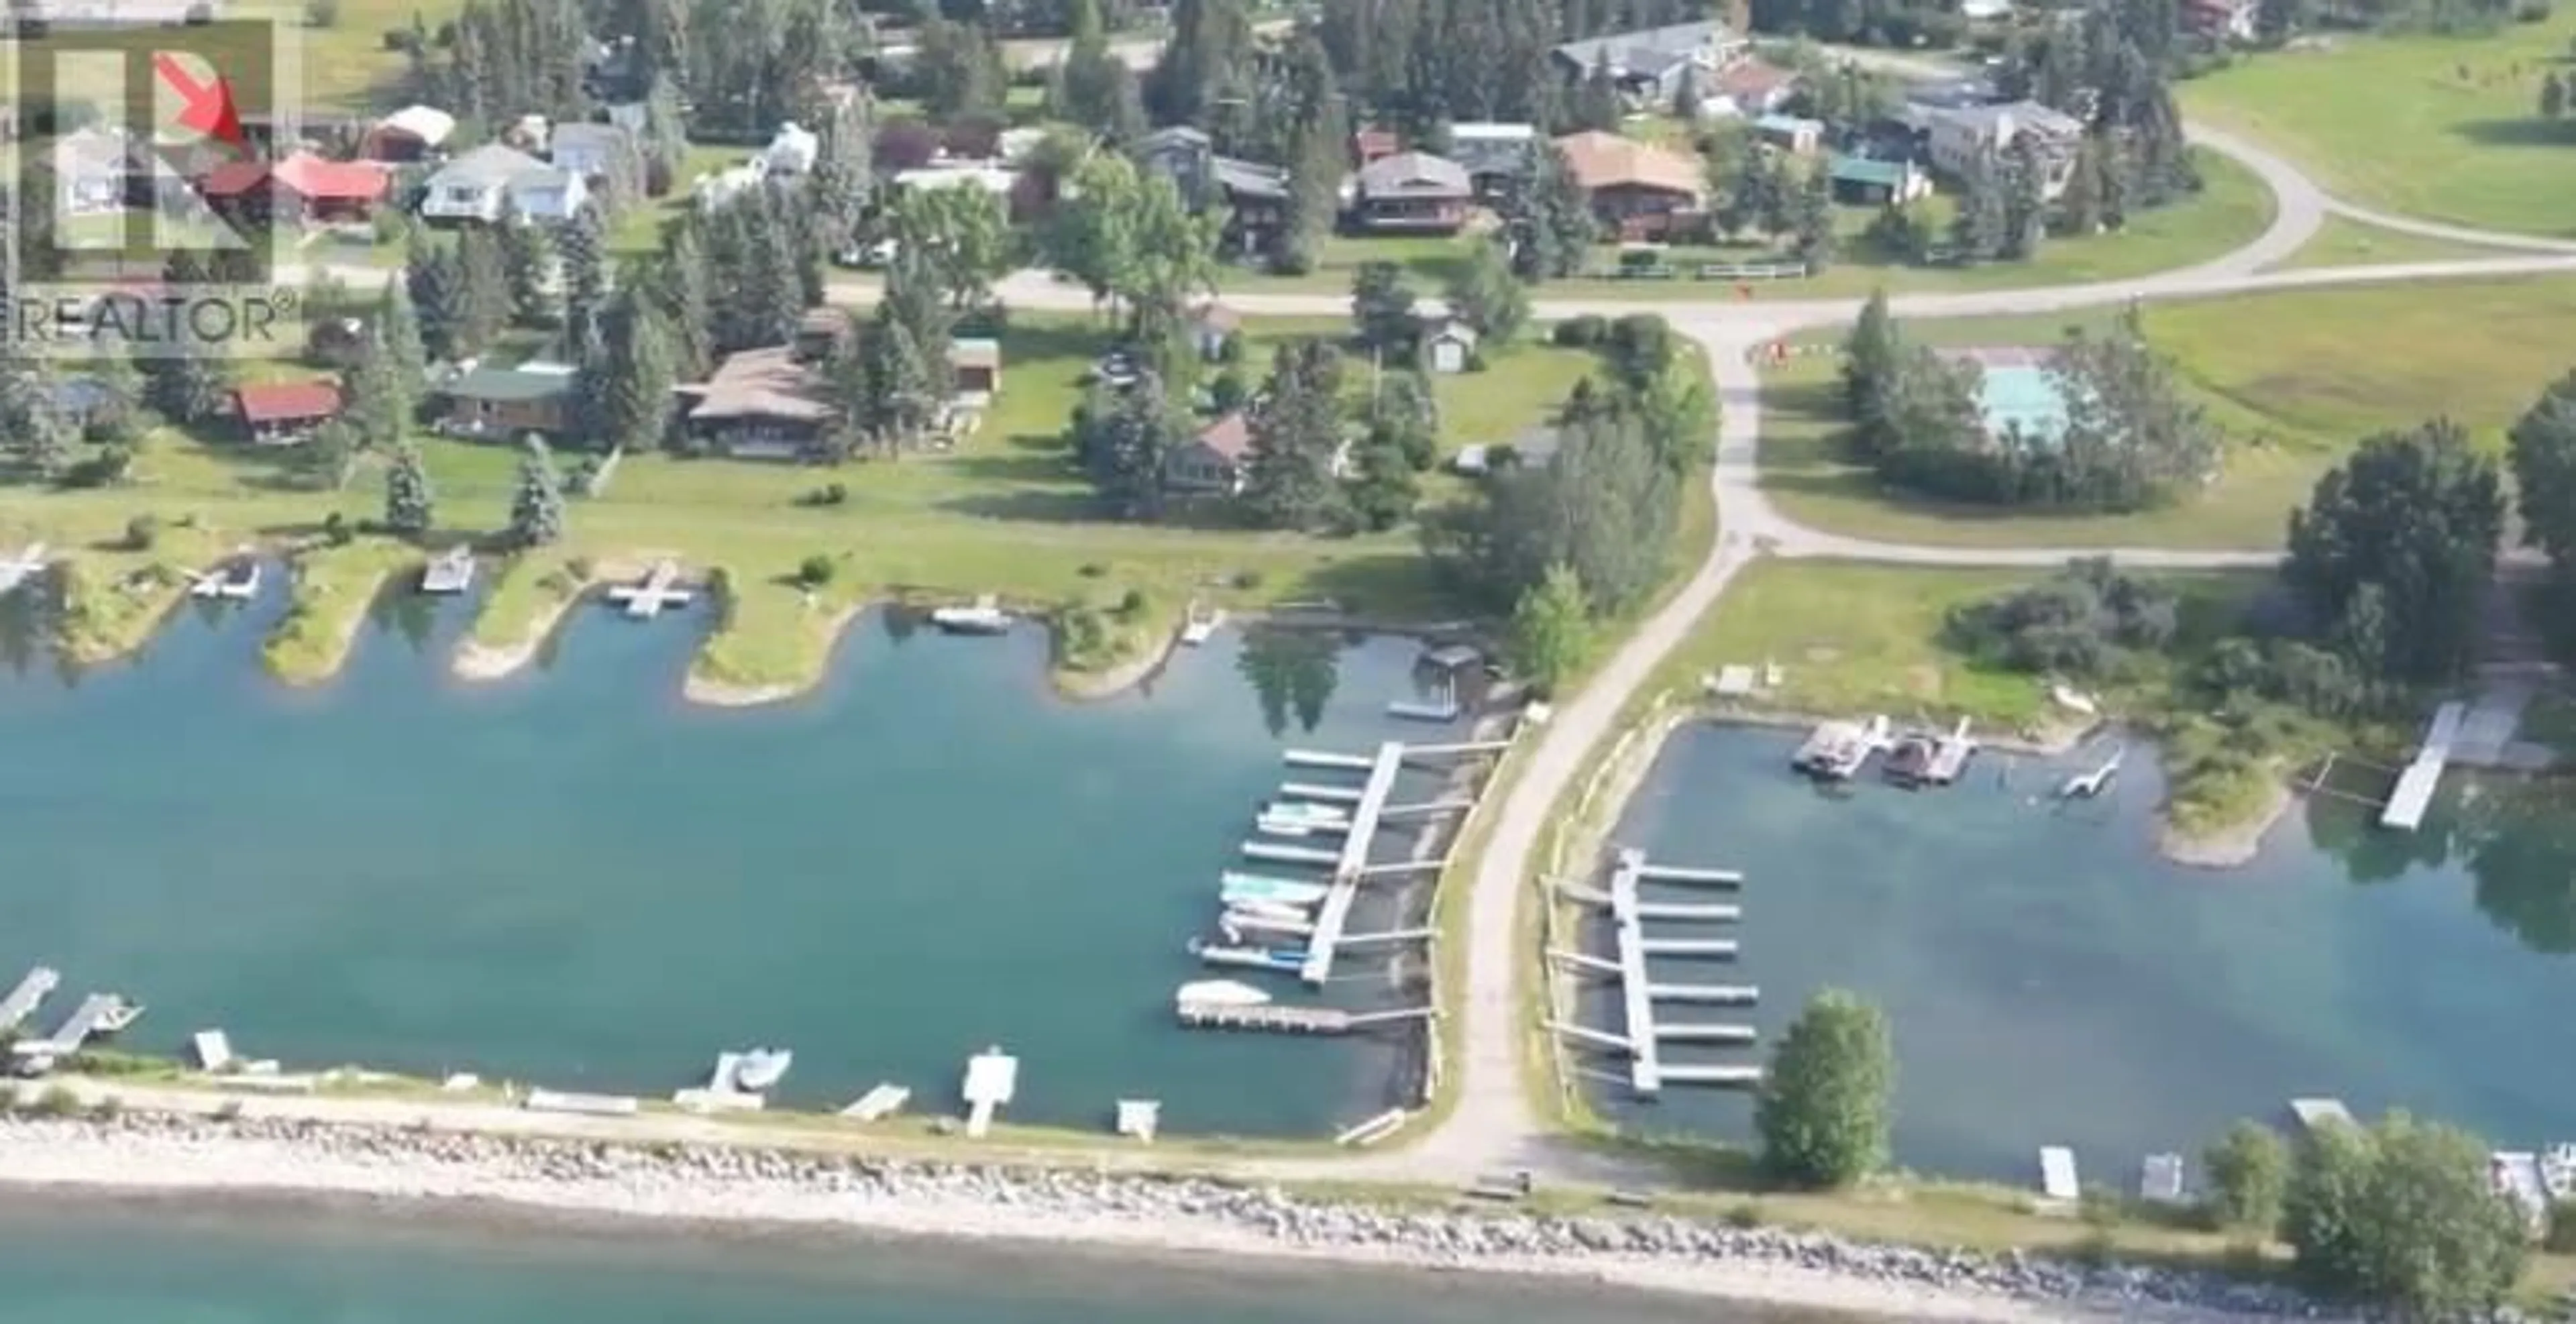 Lakeview for 416 Ghost Lake Village, Ghost Lake Alberta T4C2G4